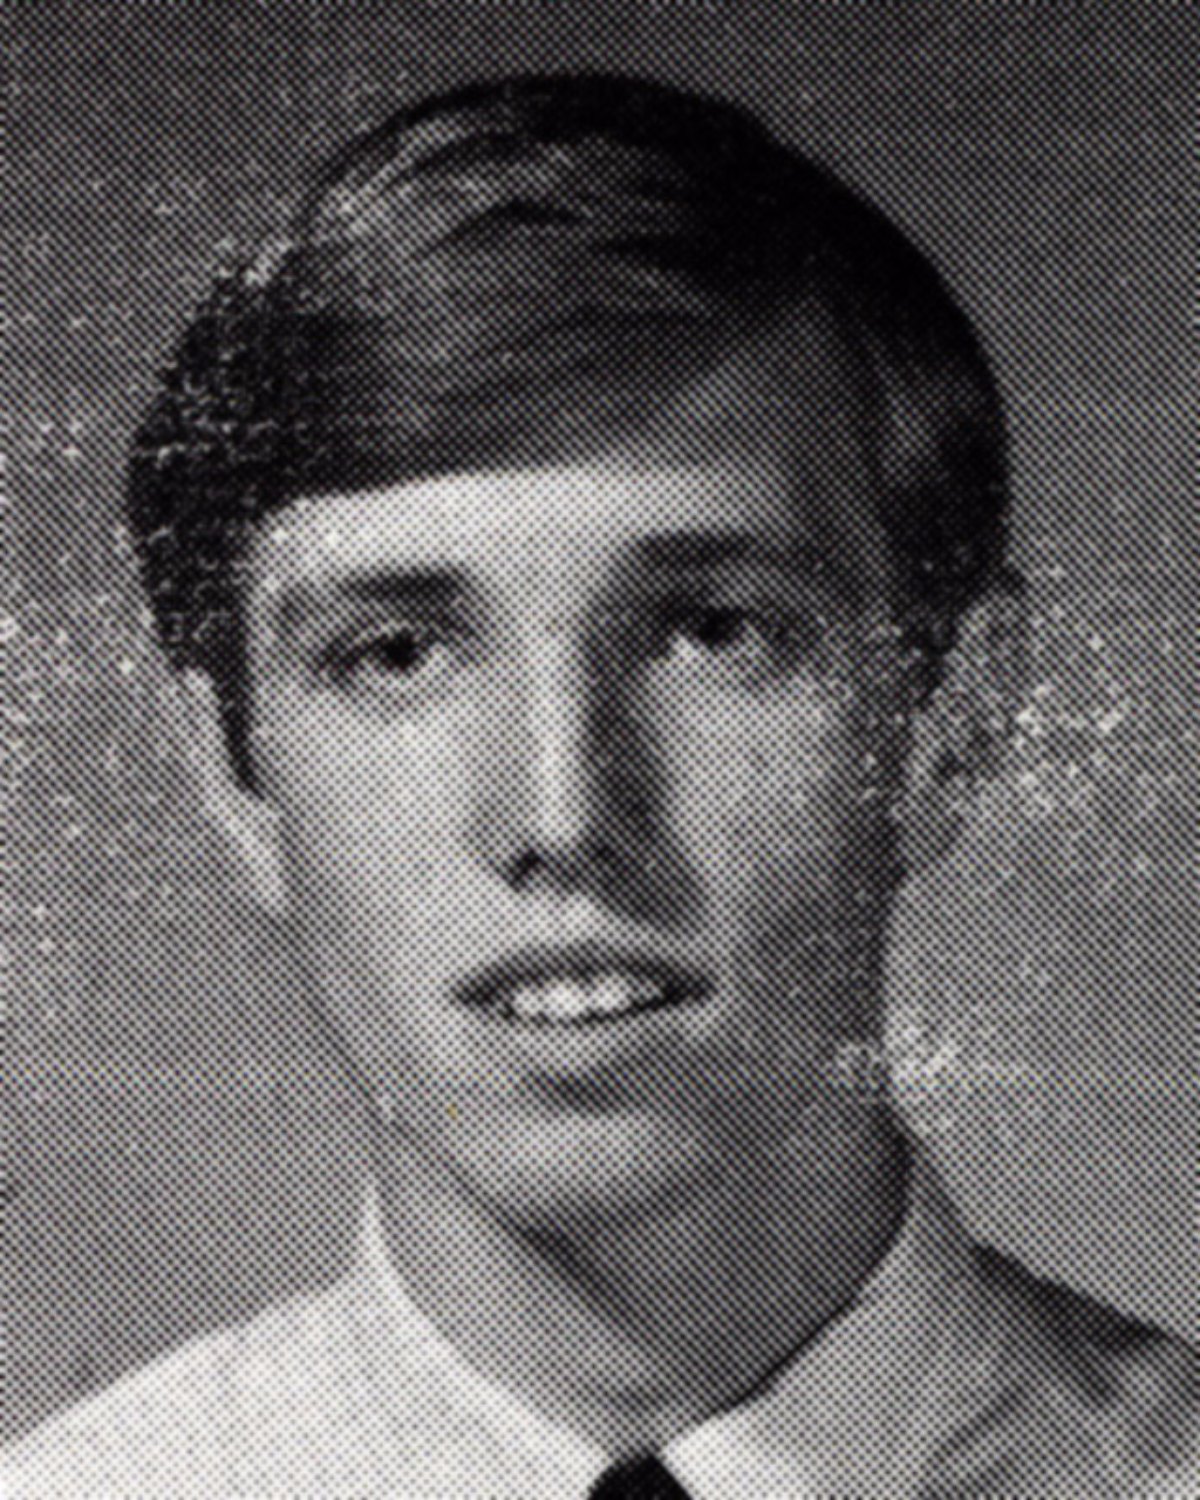 Tom Petty in his youth